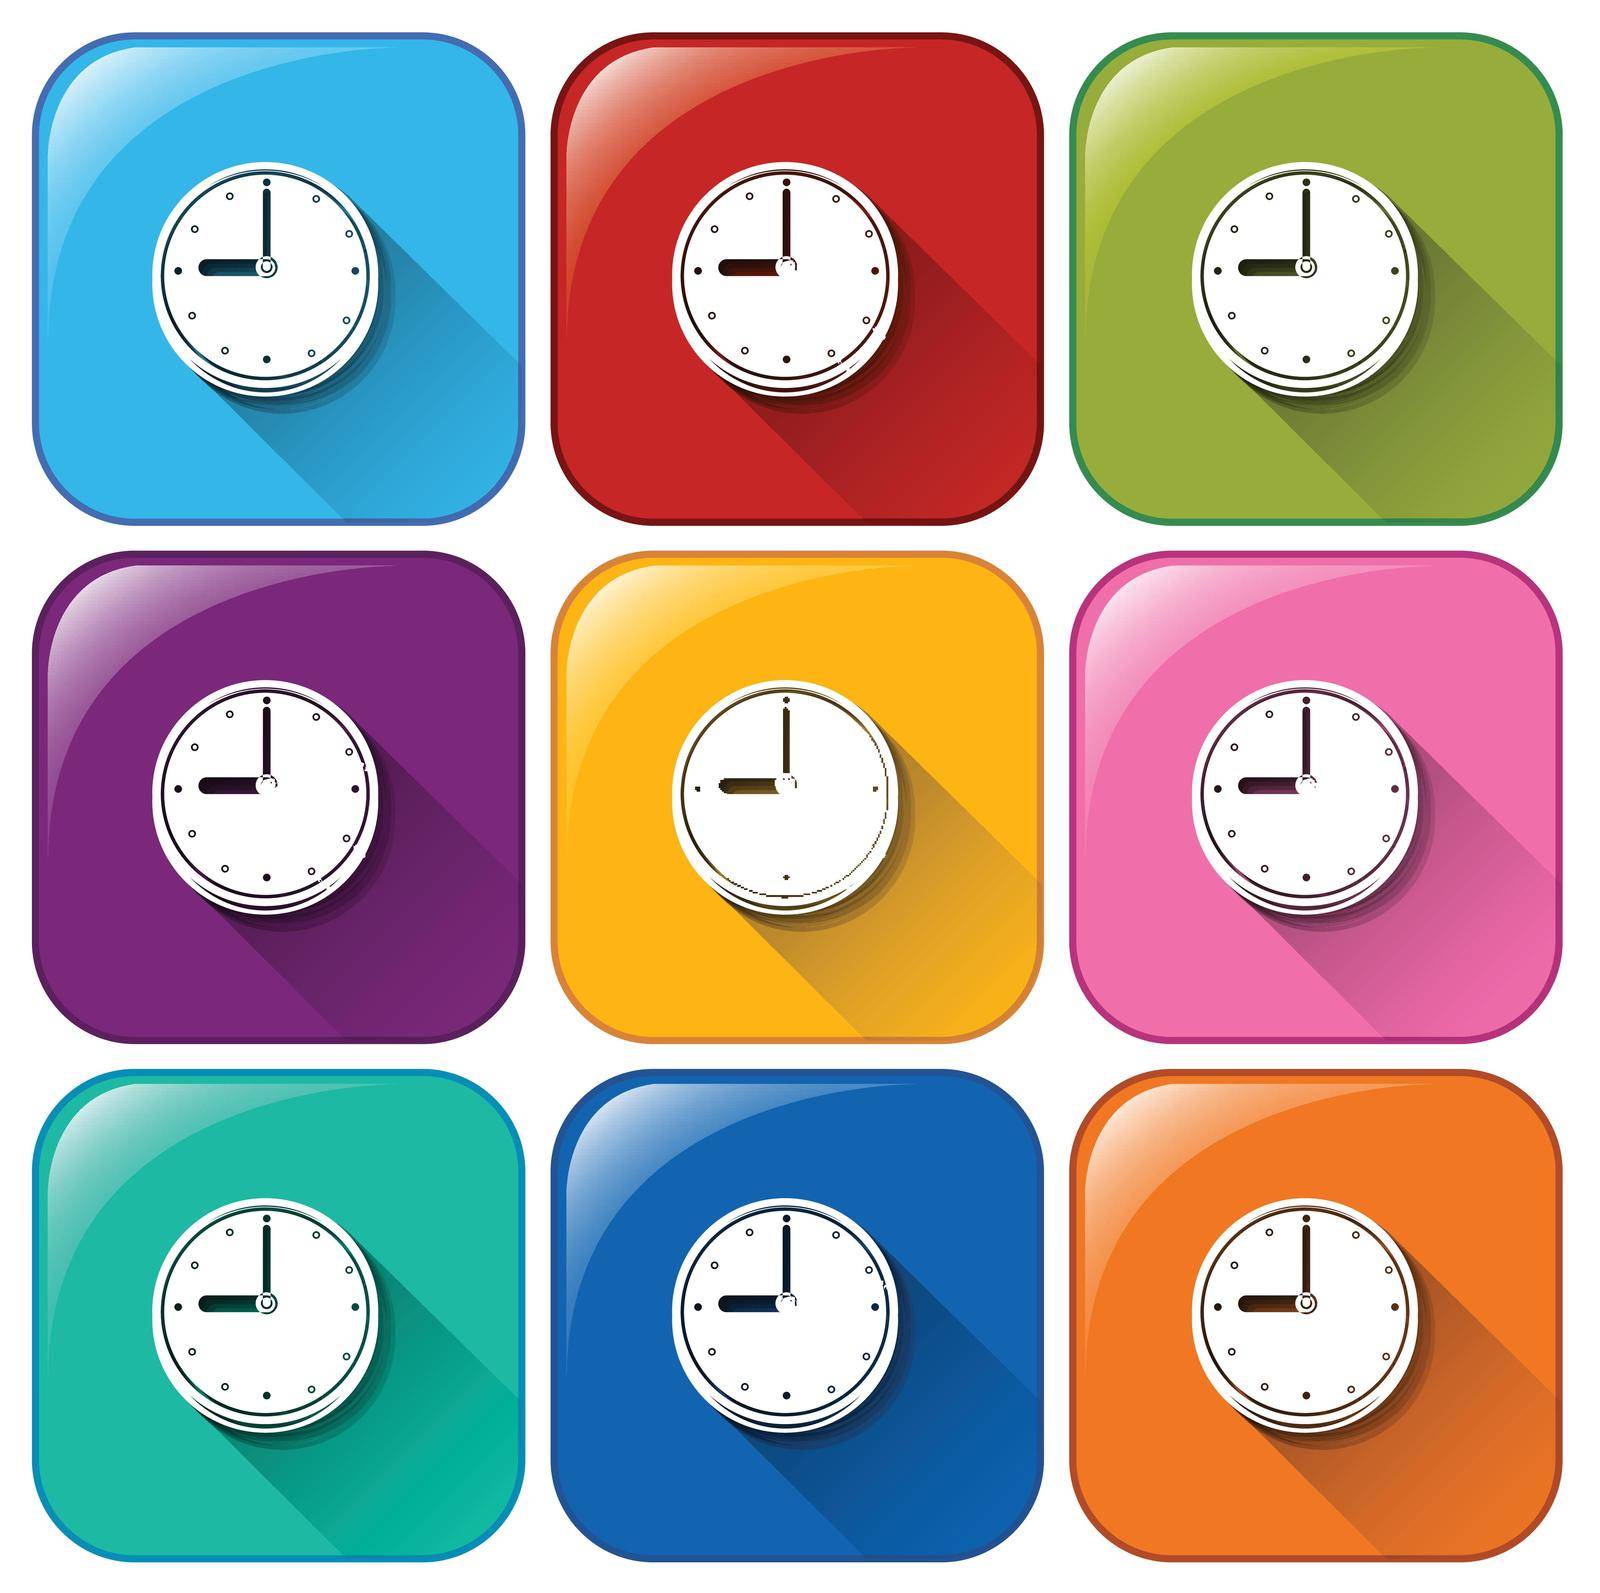 Rounded buttons with wallclocks on a white background